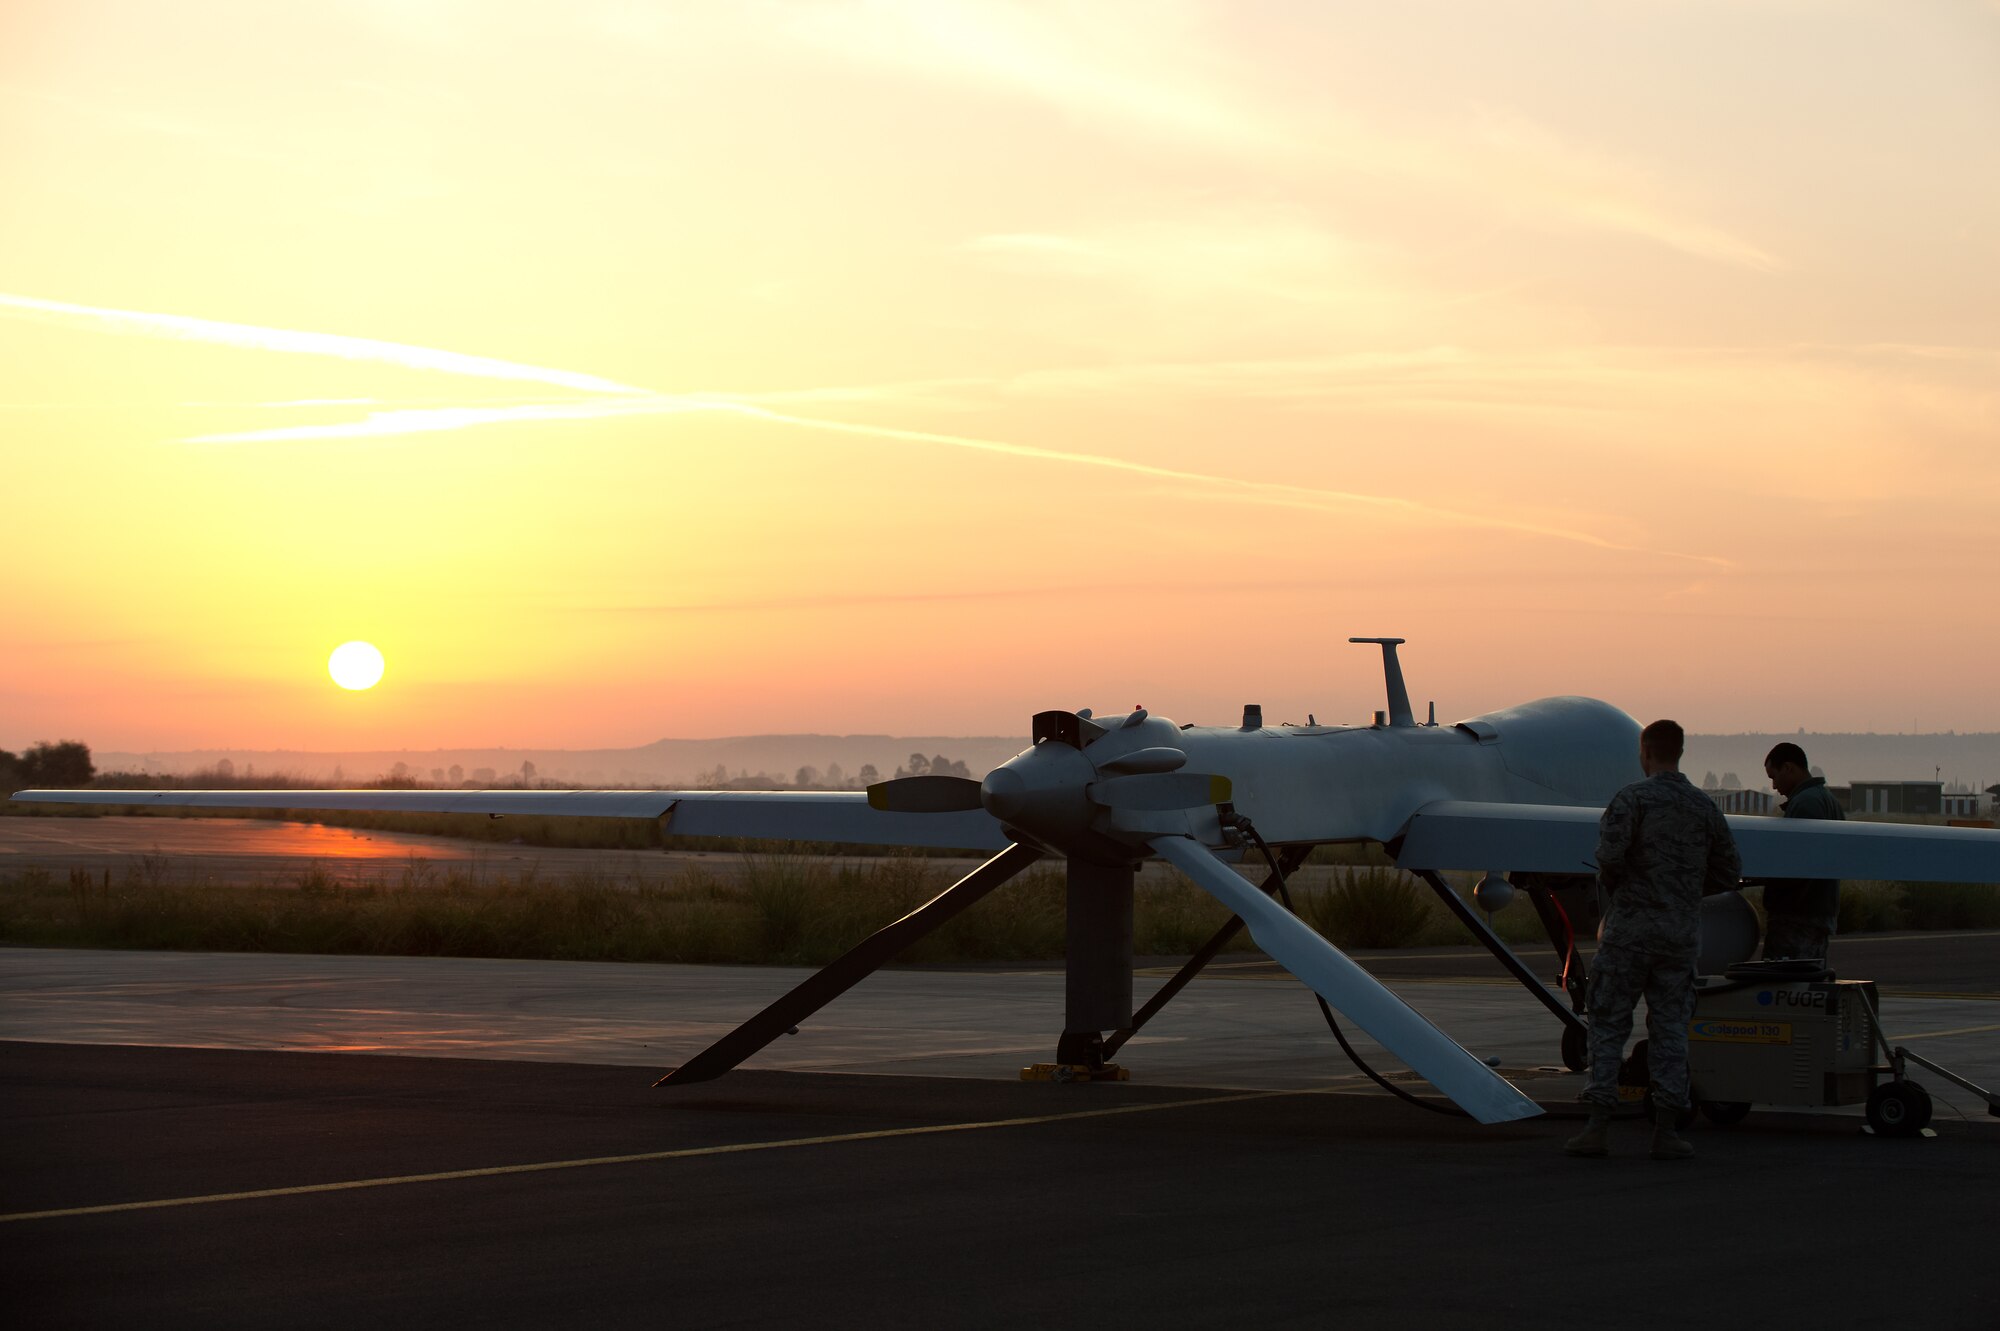 Airmen attached to the 324th Expeditionary Reconnaissance Squadron perform a preflight inspection on an MQ-1 Predator unmanned aerial vehicle Oct. 22, 2013. (U.S. Navy photo/Mass Communication Specialist 2nd Class Brian T. Glunt)